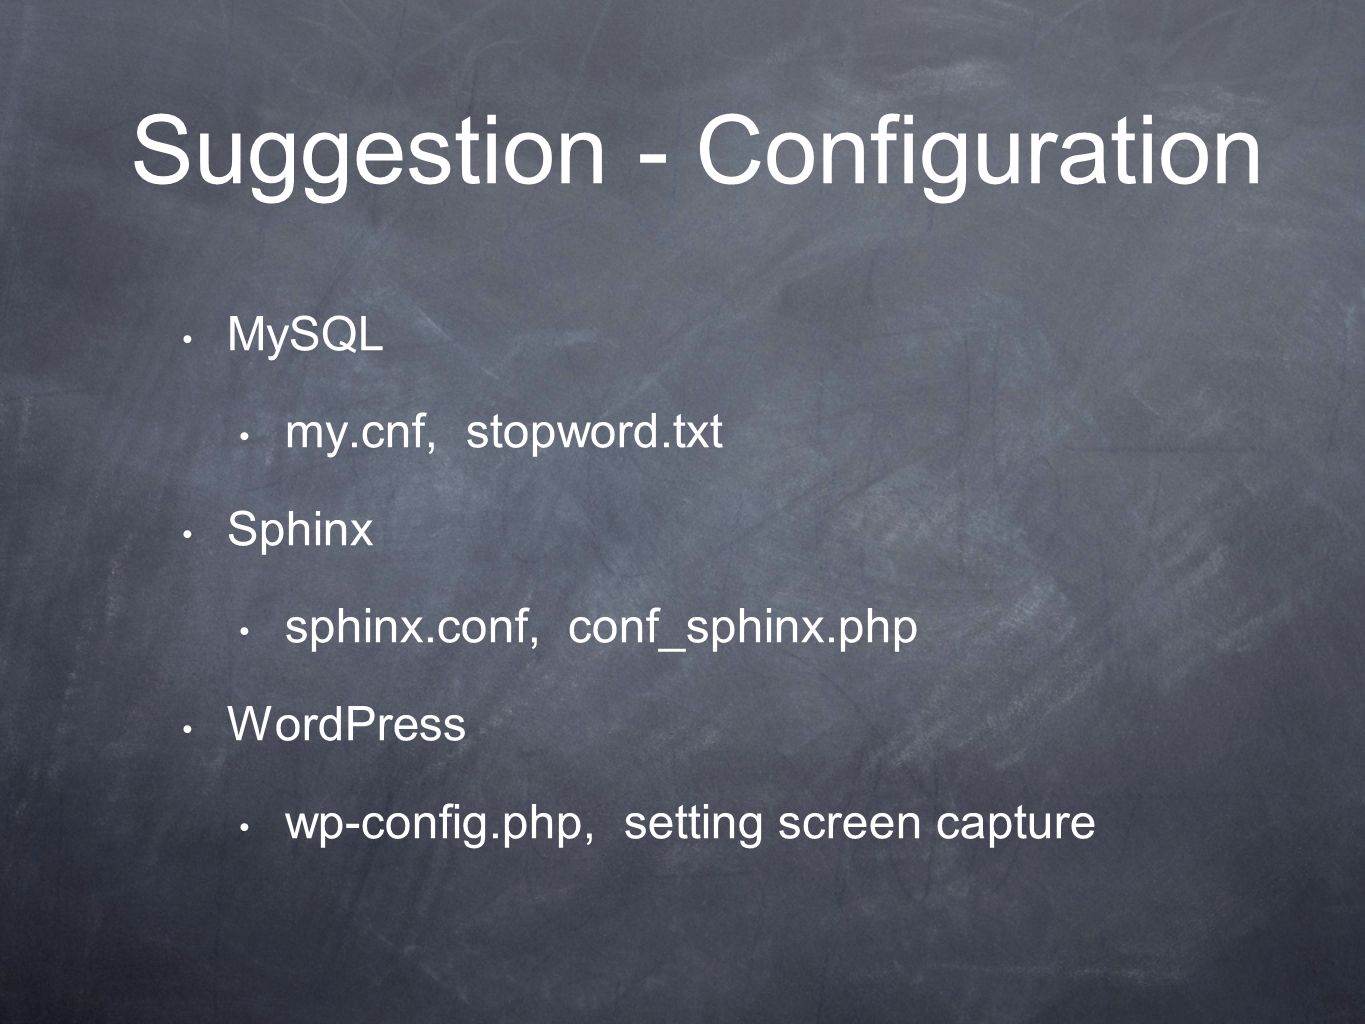 Suggestion - Configuration MySQL my.cnf, stopword.txt Sphinx sphinx.conf, conf_sphinx.php WordPress wp-config.php, setting screen capture